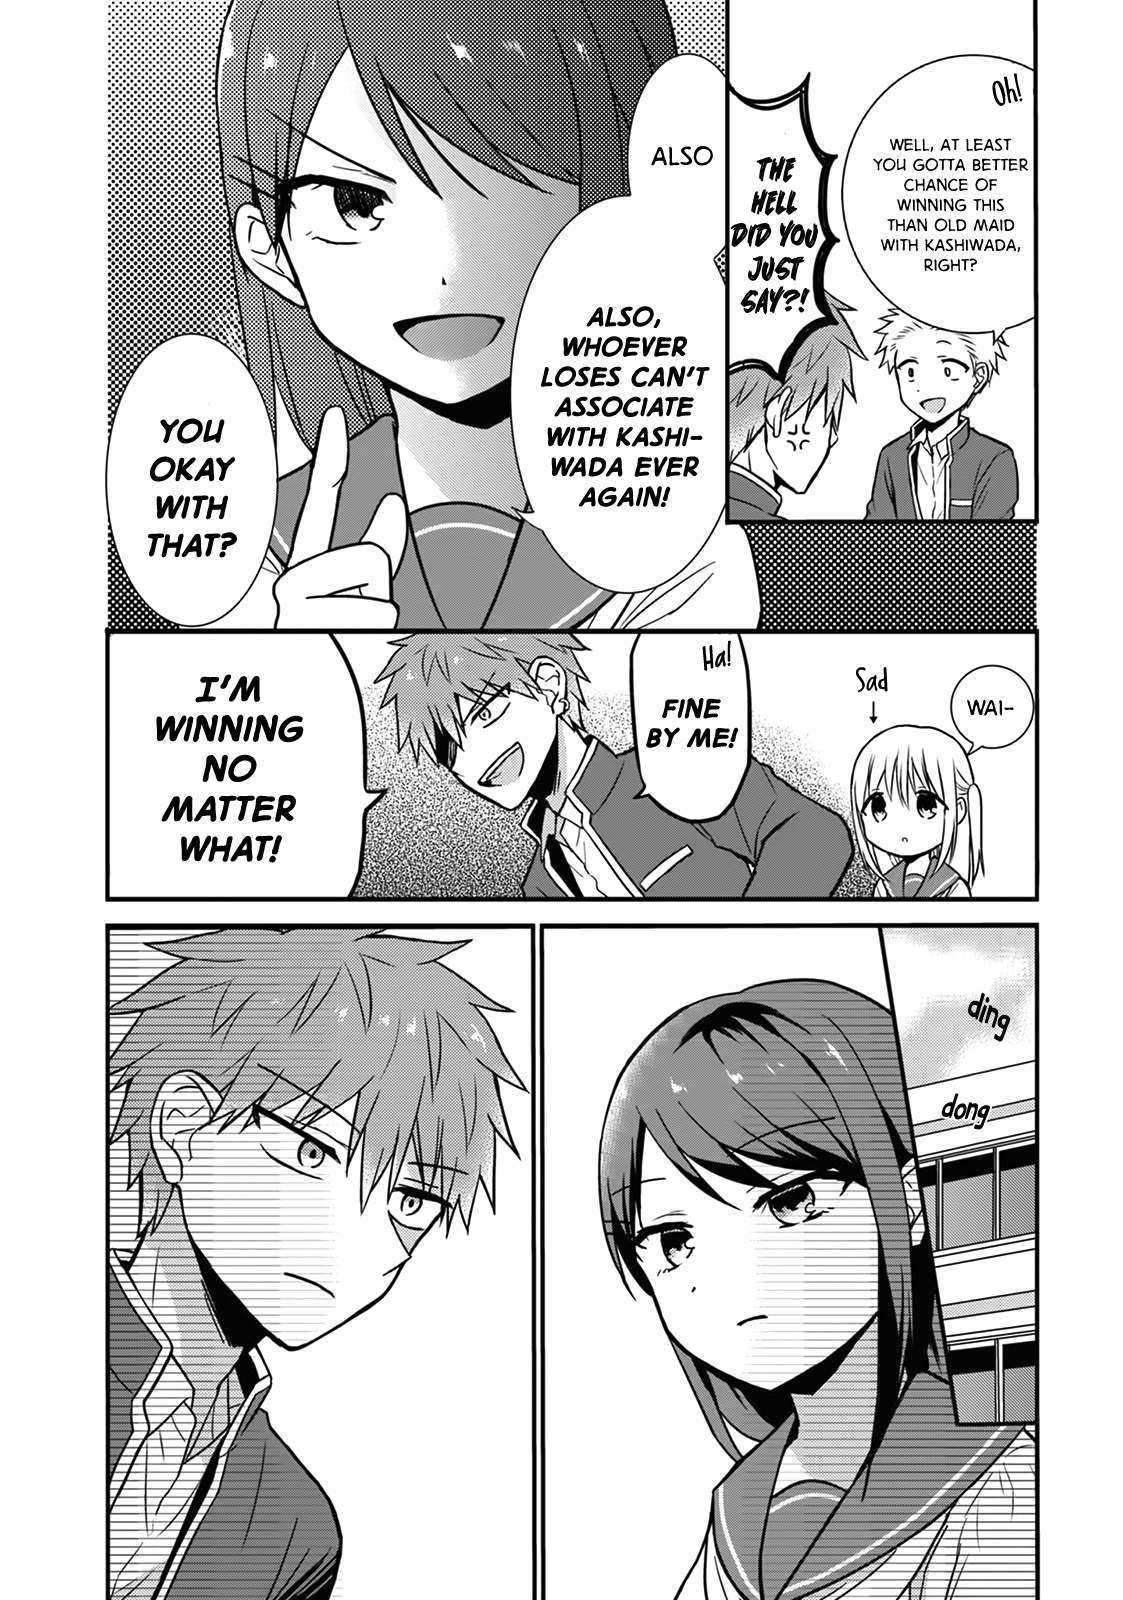 Expressionless Kashiwada-San And Emotional Oota-Kun Vol.1 Chapter 10: The Battle Between Oota-Kun And Tabuchi-San - Picture 3